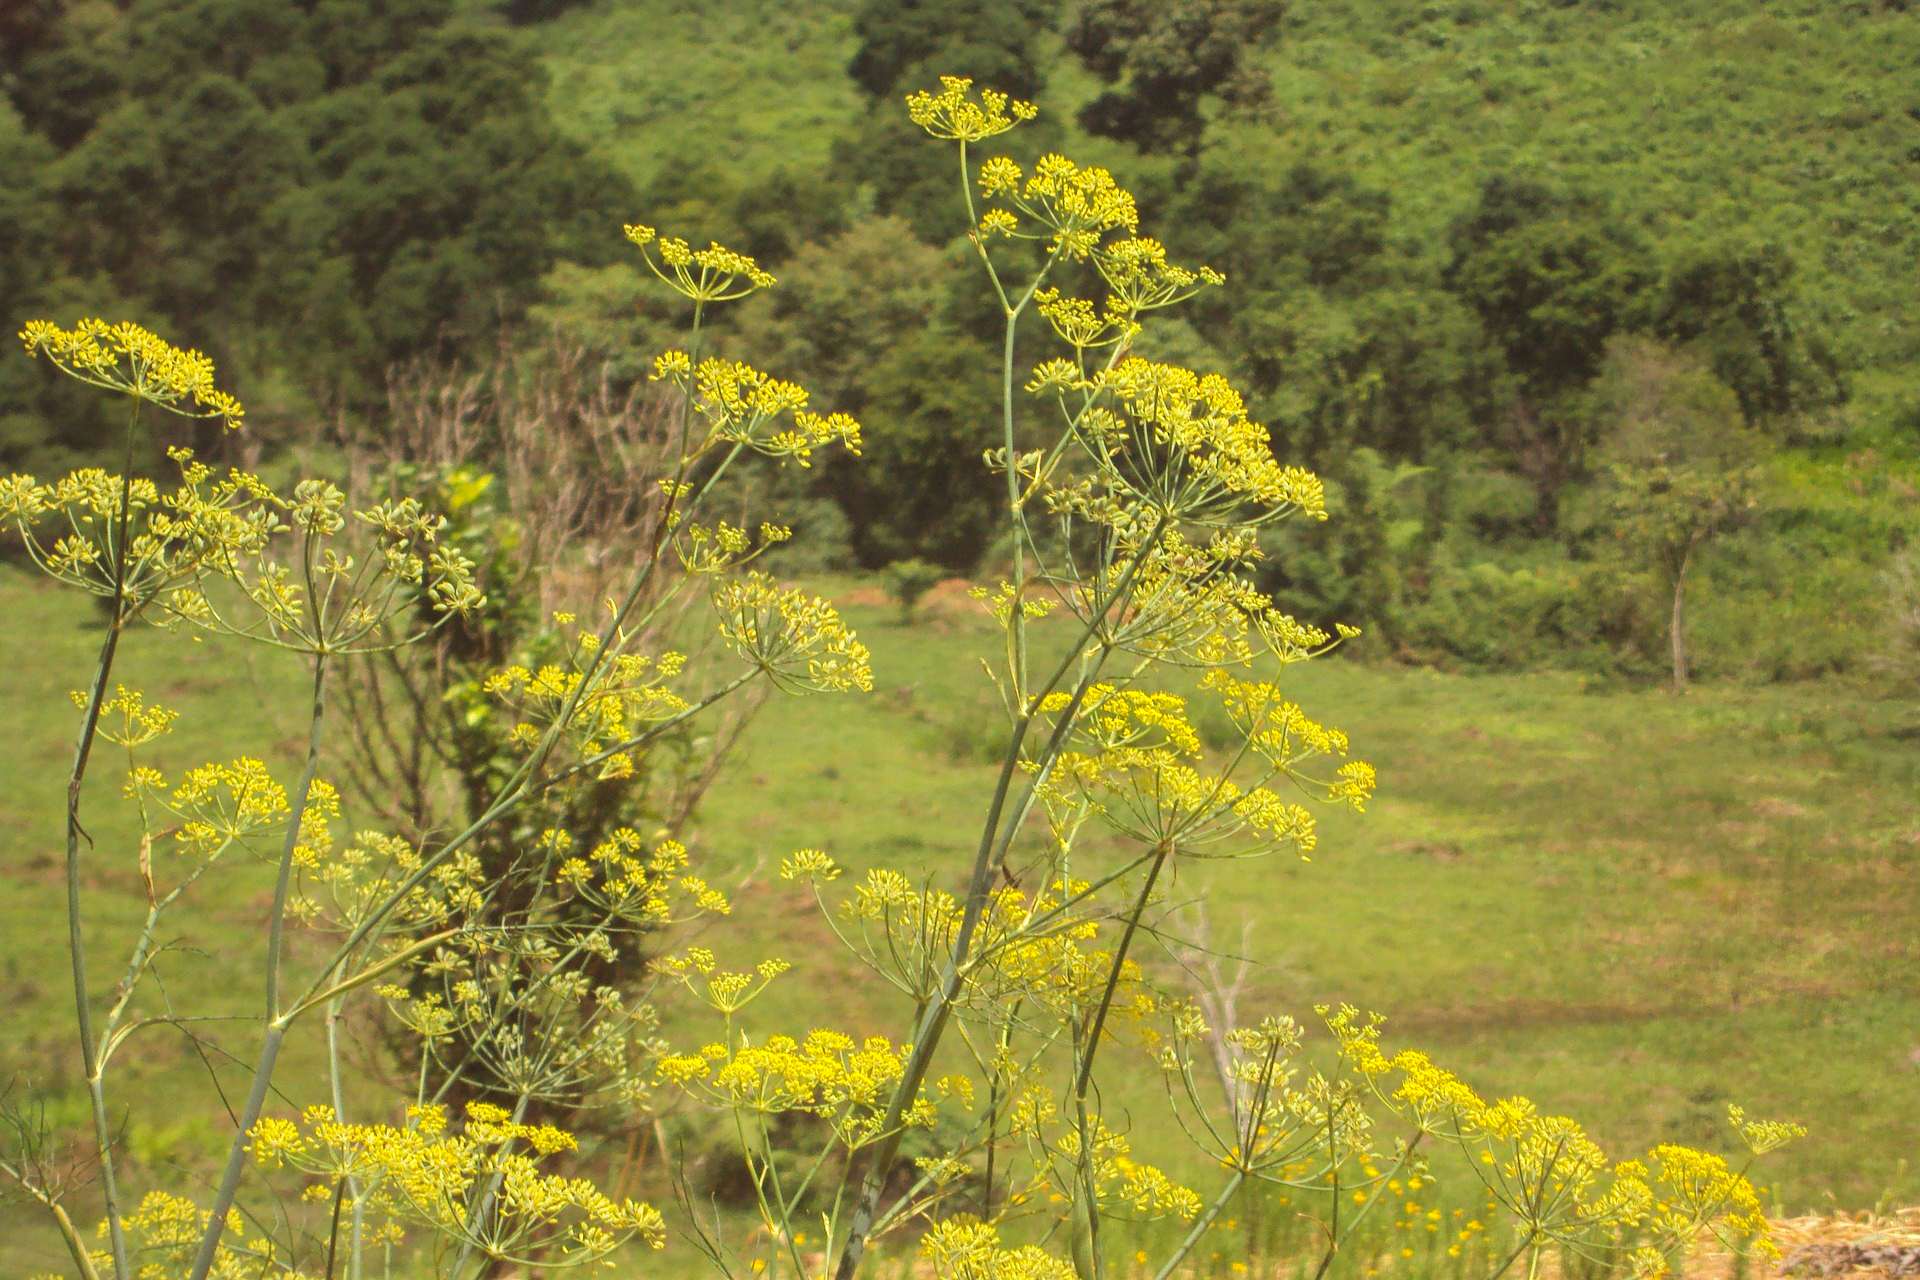 The ancient herb may be hiding in plain sight as giant Tangier fennel